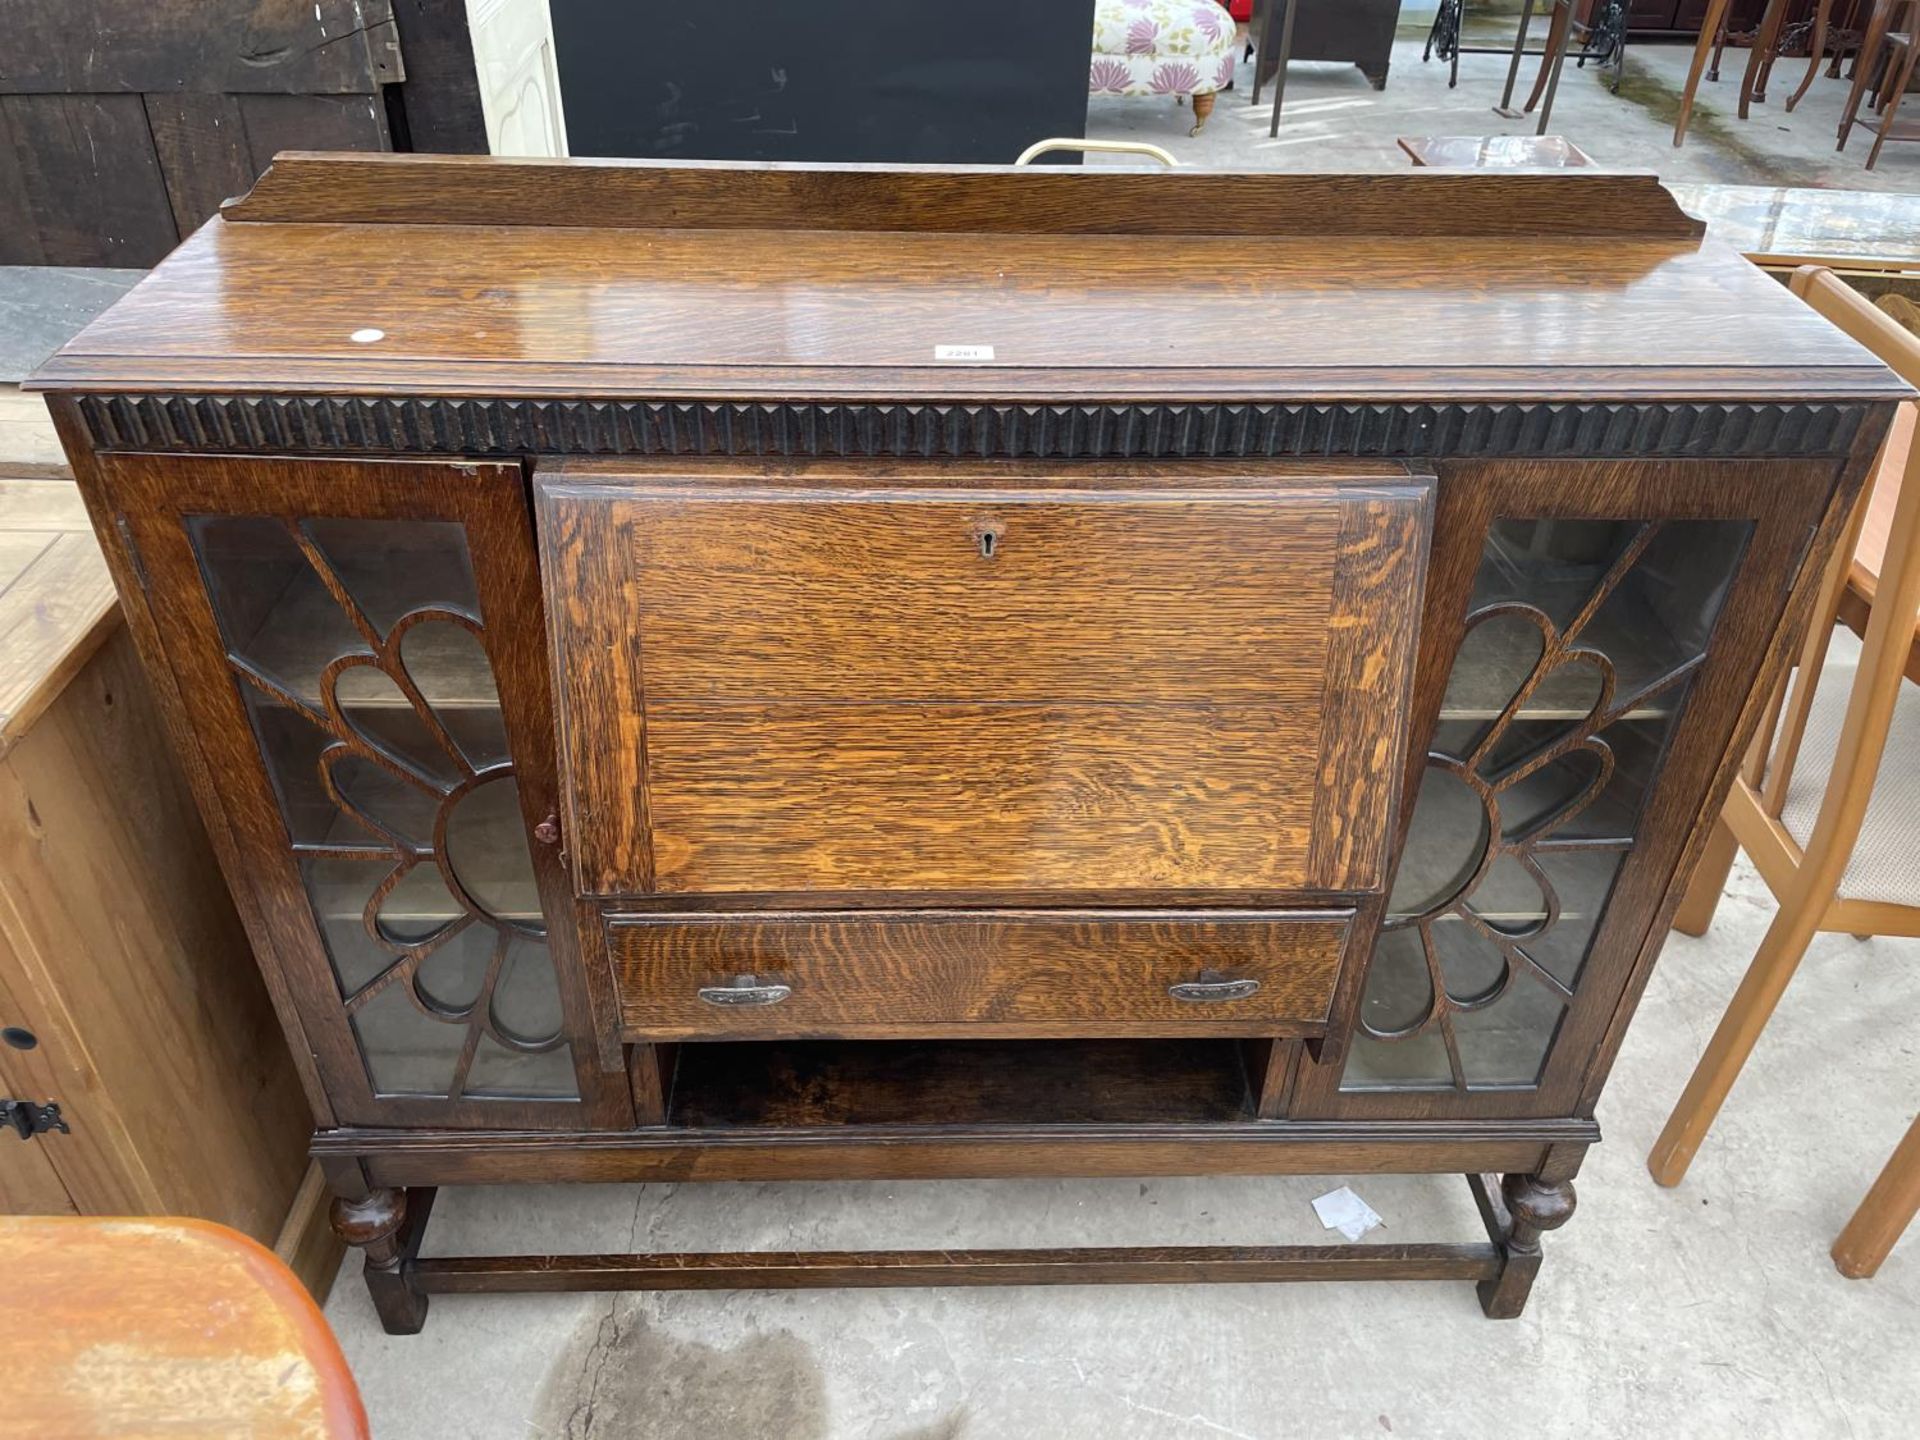 AN EARLY 20TH CENTURY OAK SIDE BY SIDE CABINET, 48" WIDE GLASS ON RIGHT PANEL NEEDS REPLACING